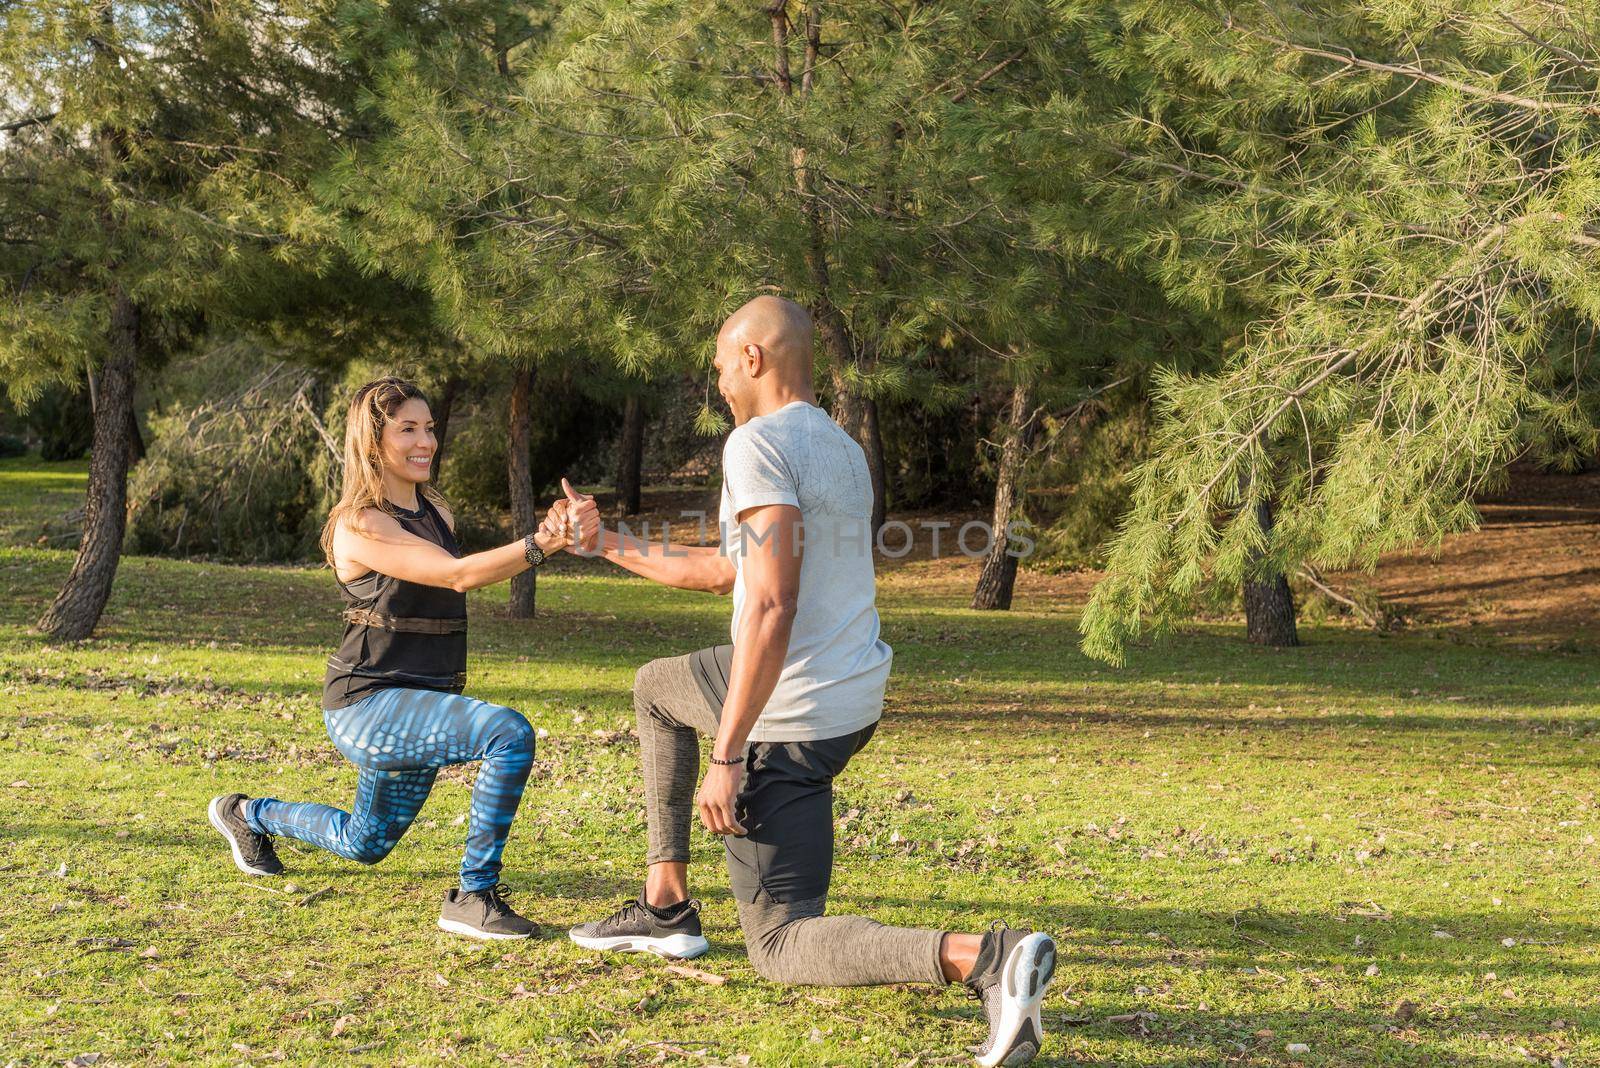 Fitness couple exercising by holding hands in the park. Multi-ethnic people exercising outside.